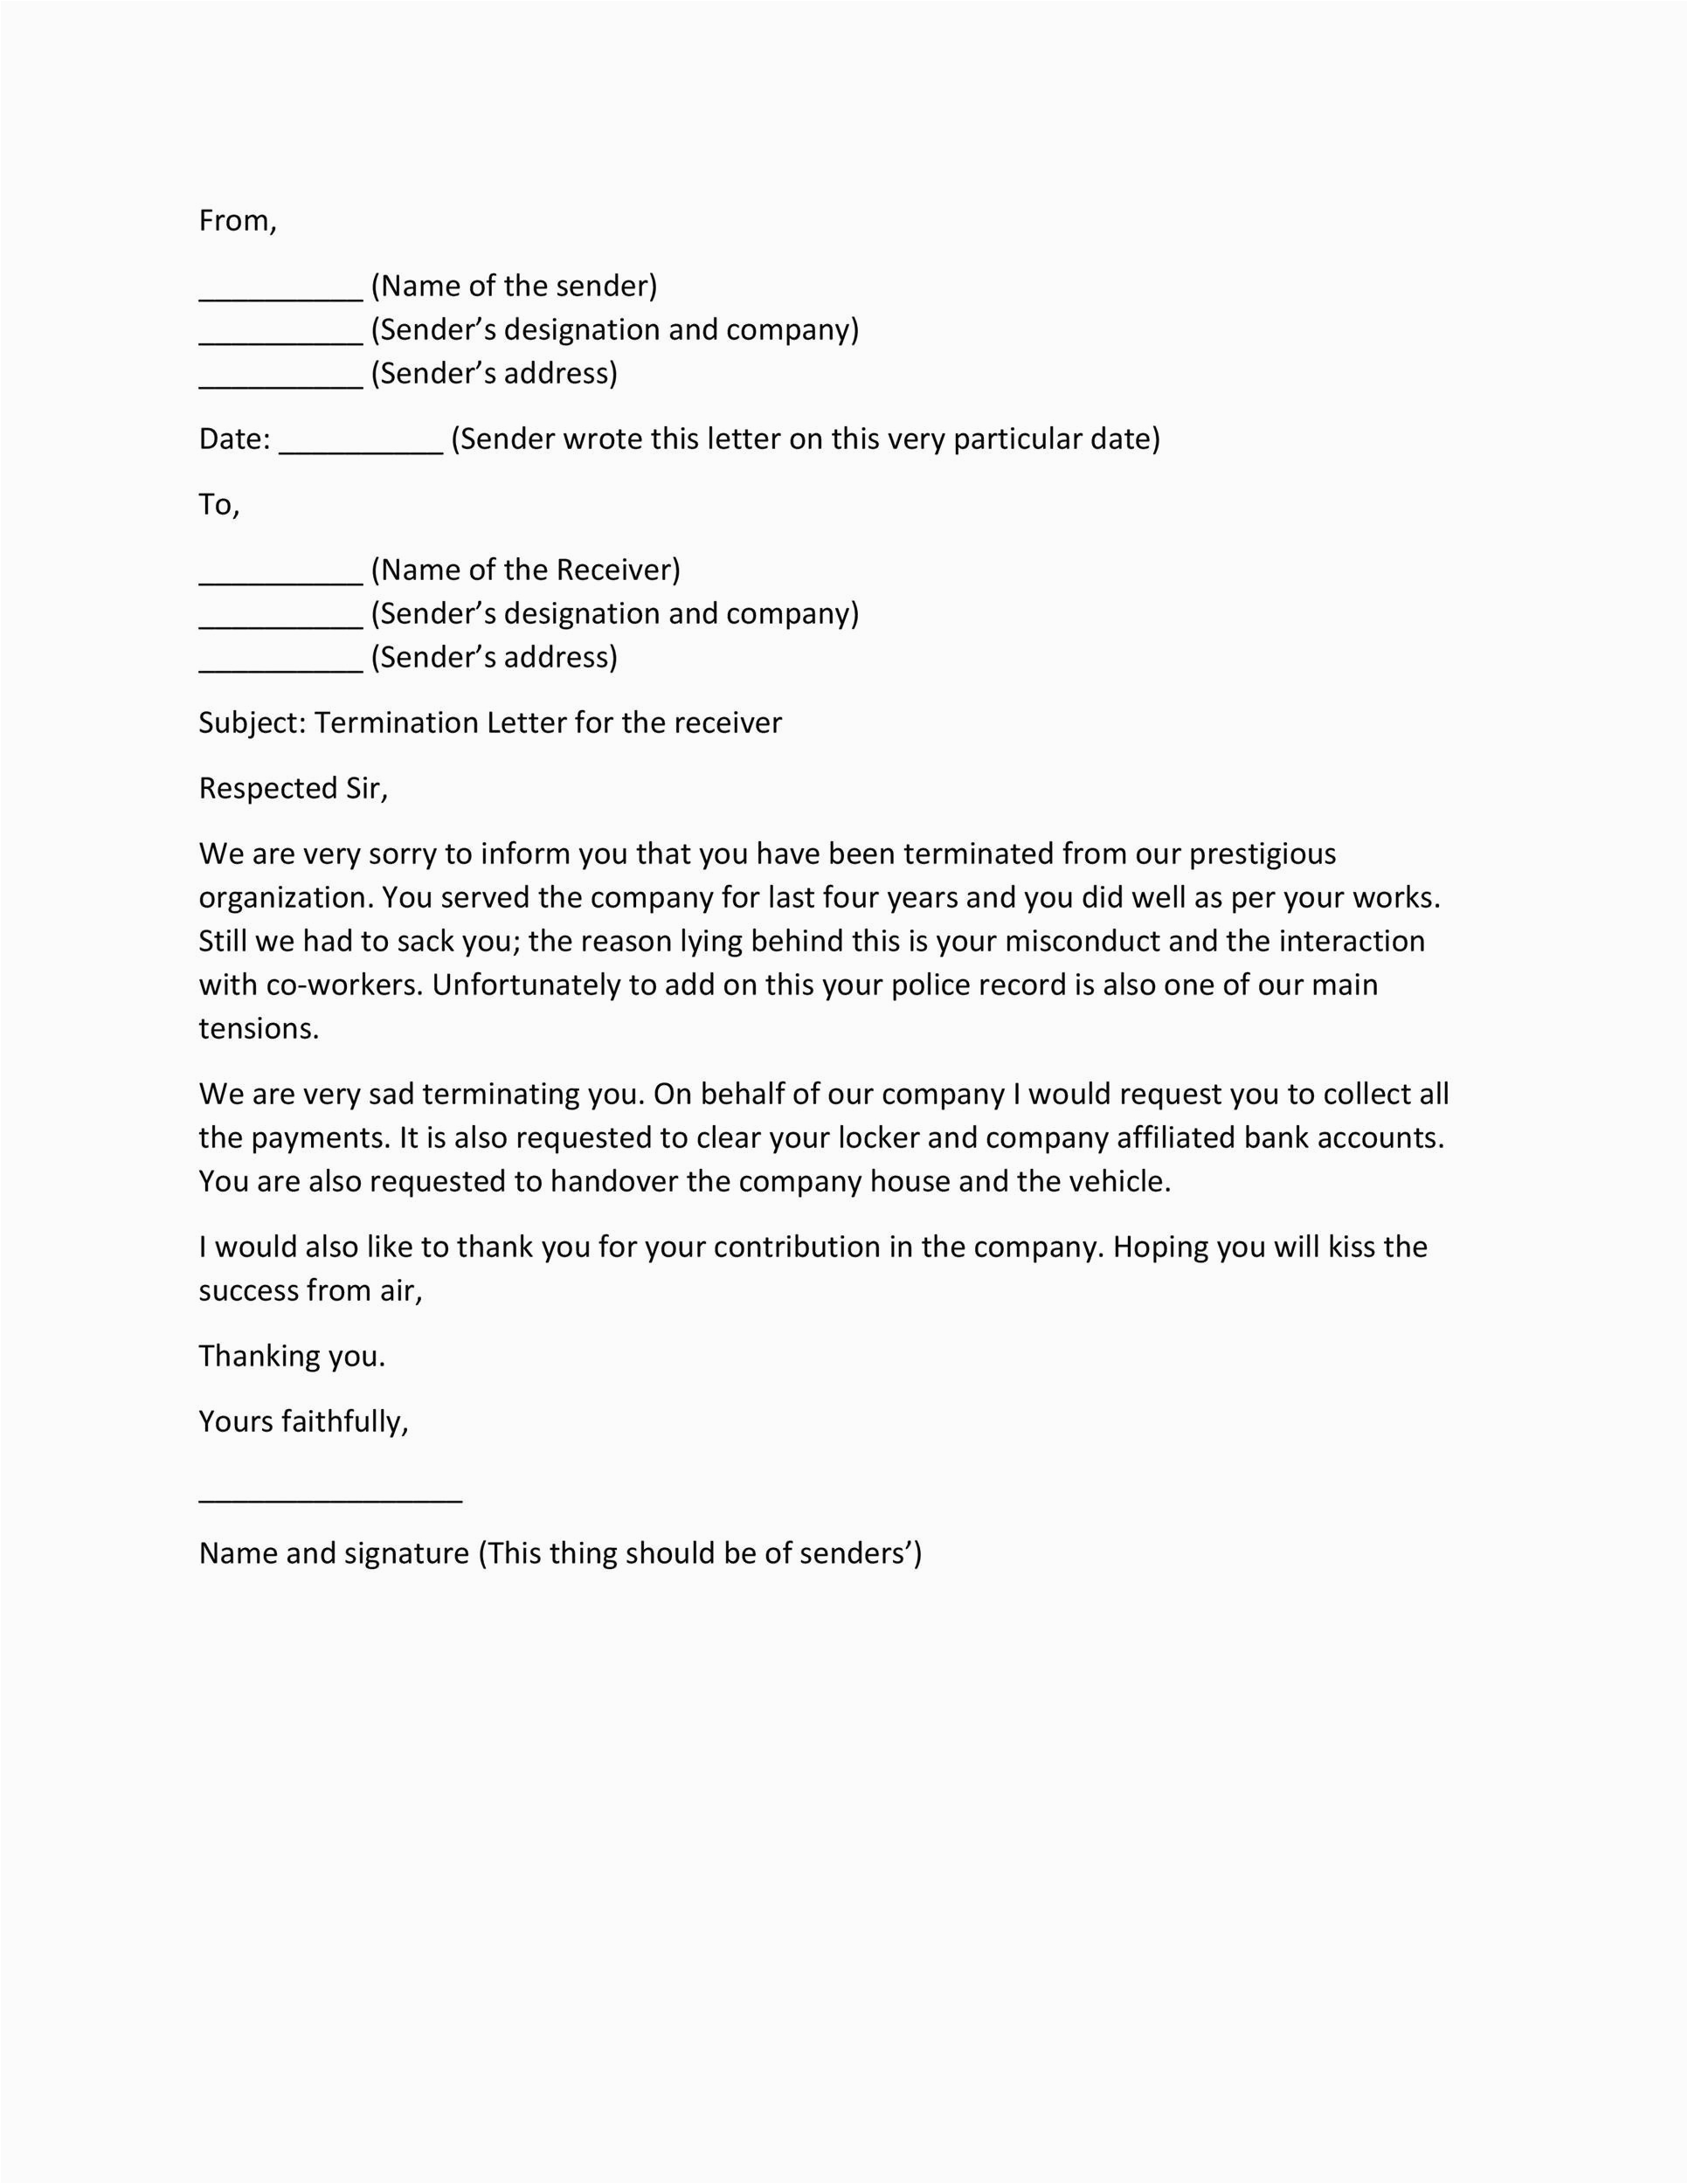 Sample Contractor Termination Lettergreat Sample Resume 35 Perfect Termination Letter Samples [lease Employee Contract]